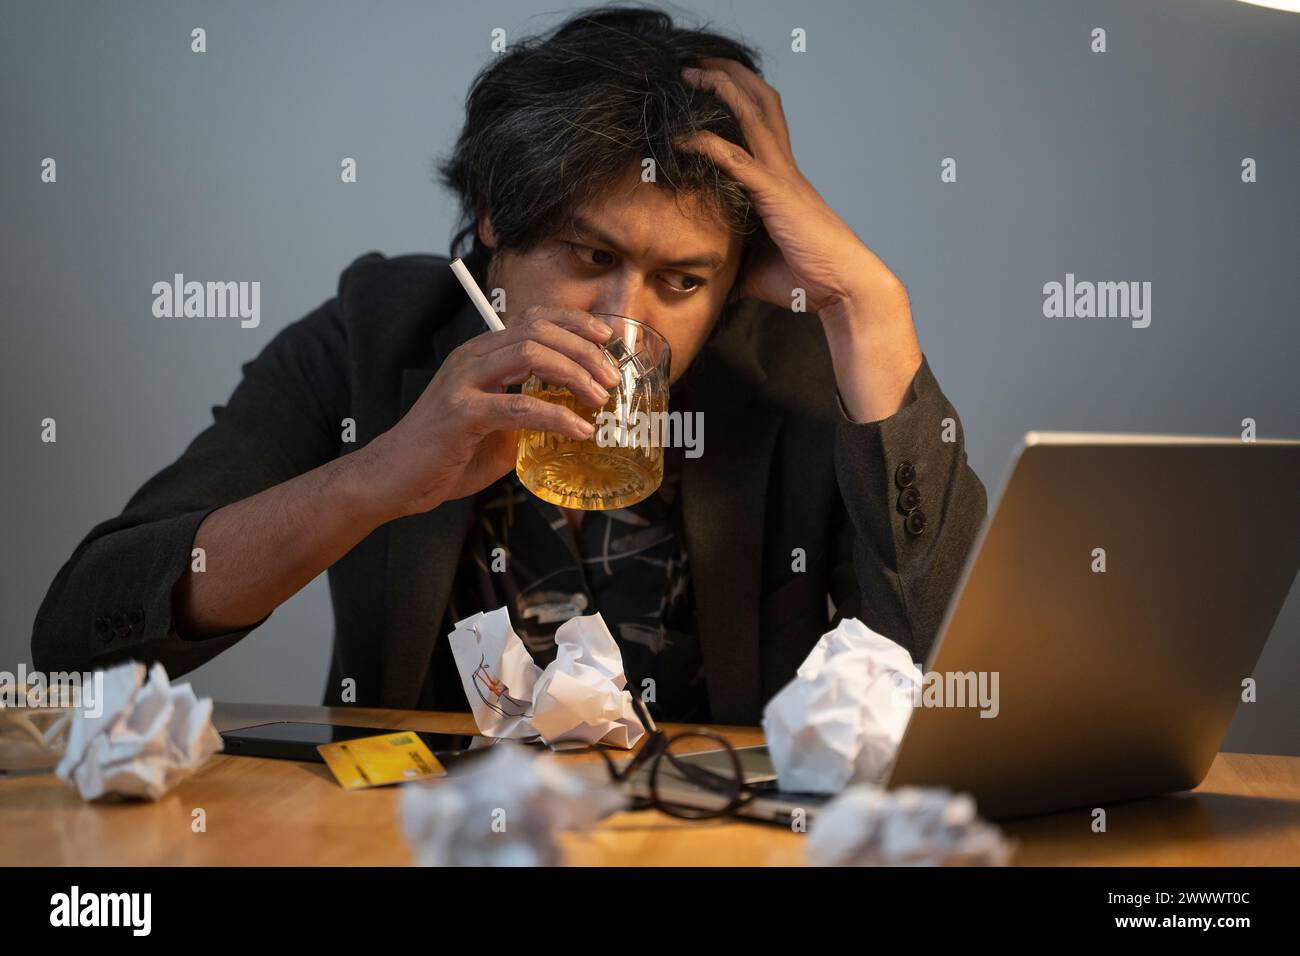 A man is tired of running an unsuccessful business by drinking. Stock Photo